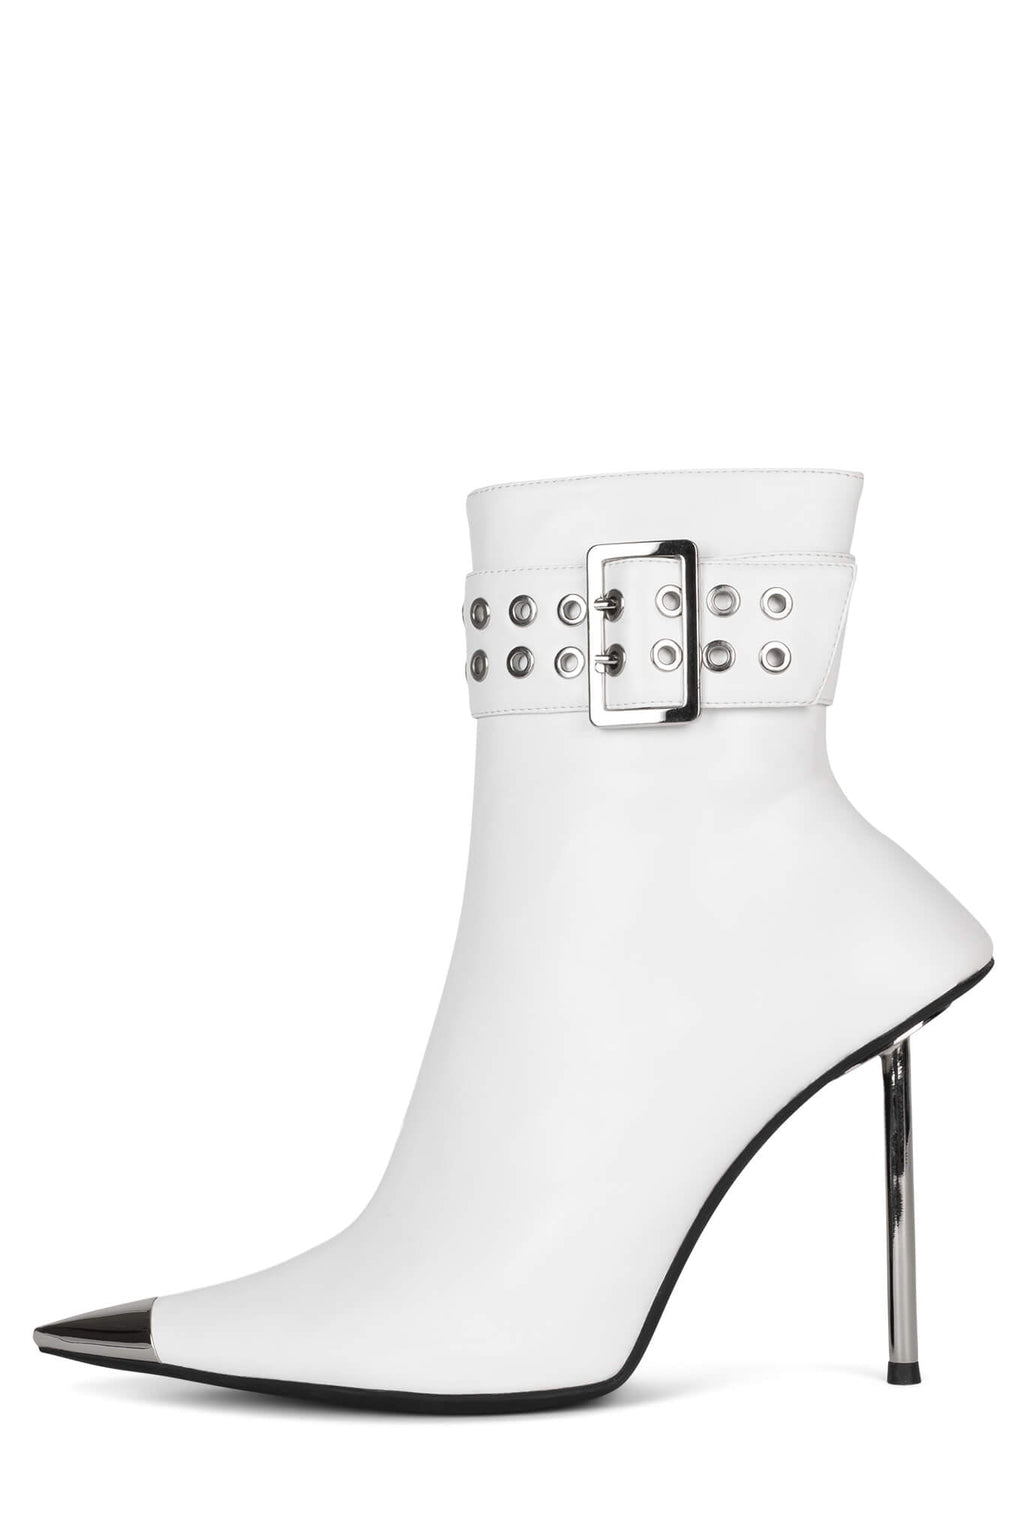 CLOUT Heeled Boot Jeffrey Campbell White Silver 6 